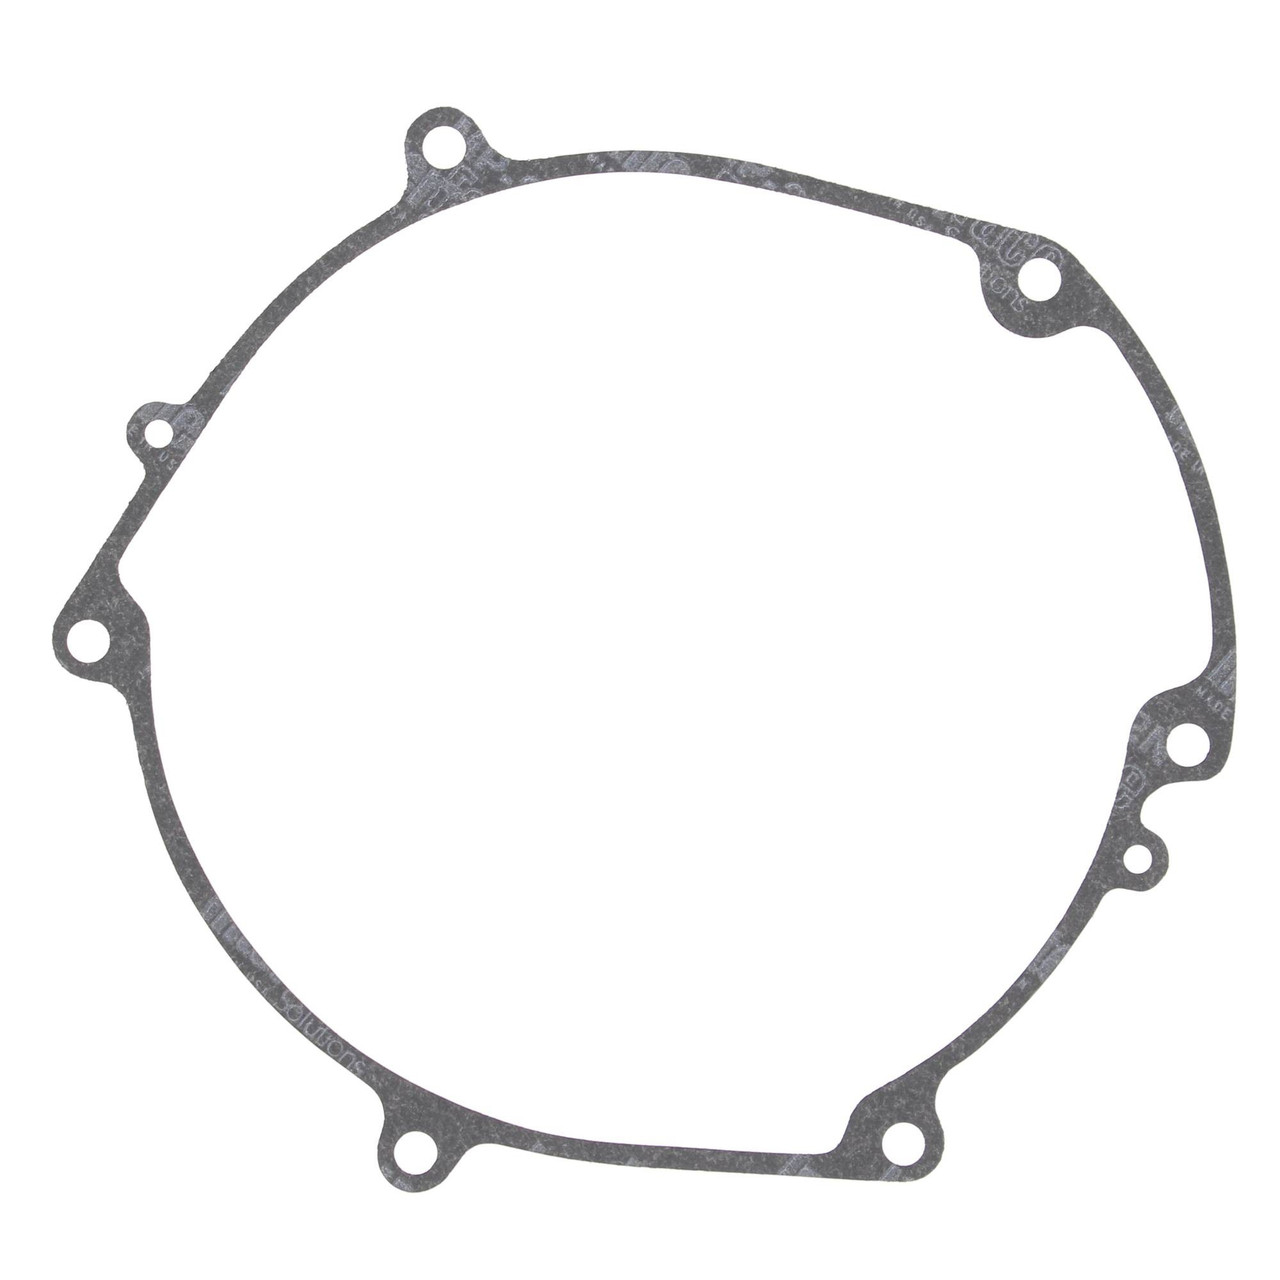 Clutch Cover Gasket For 1990 Kawasaki KX250 Offroad Motorcycle Winderosa 817482 